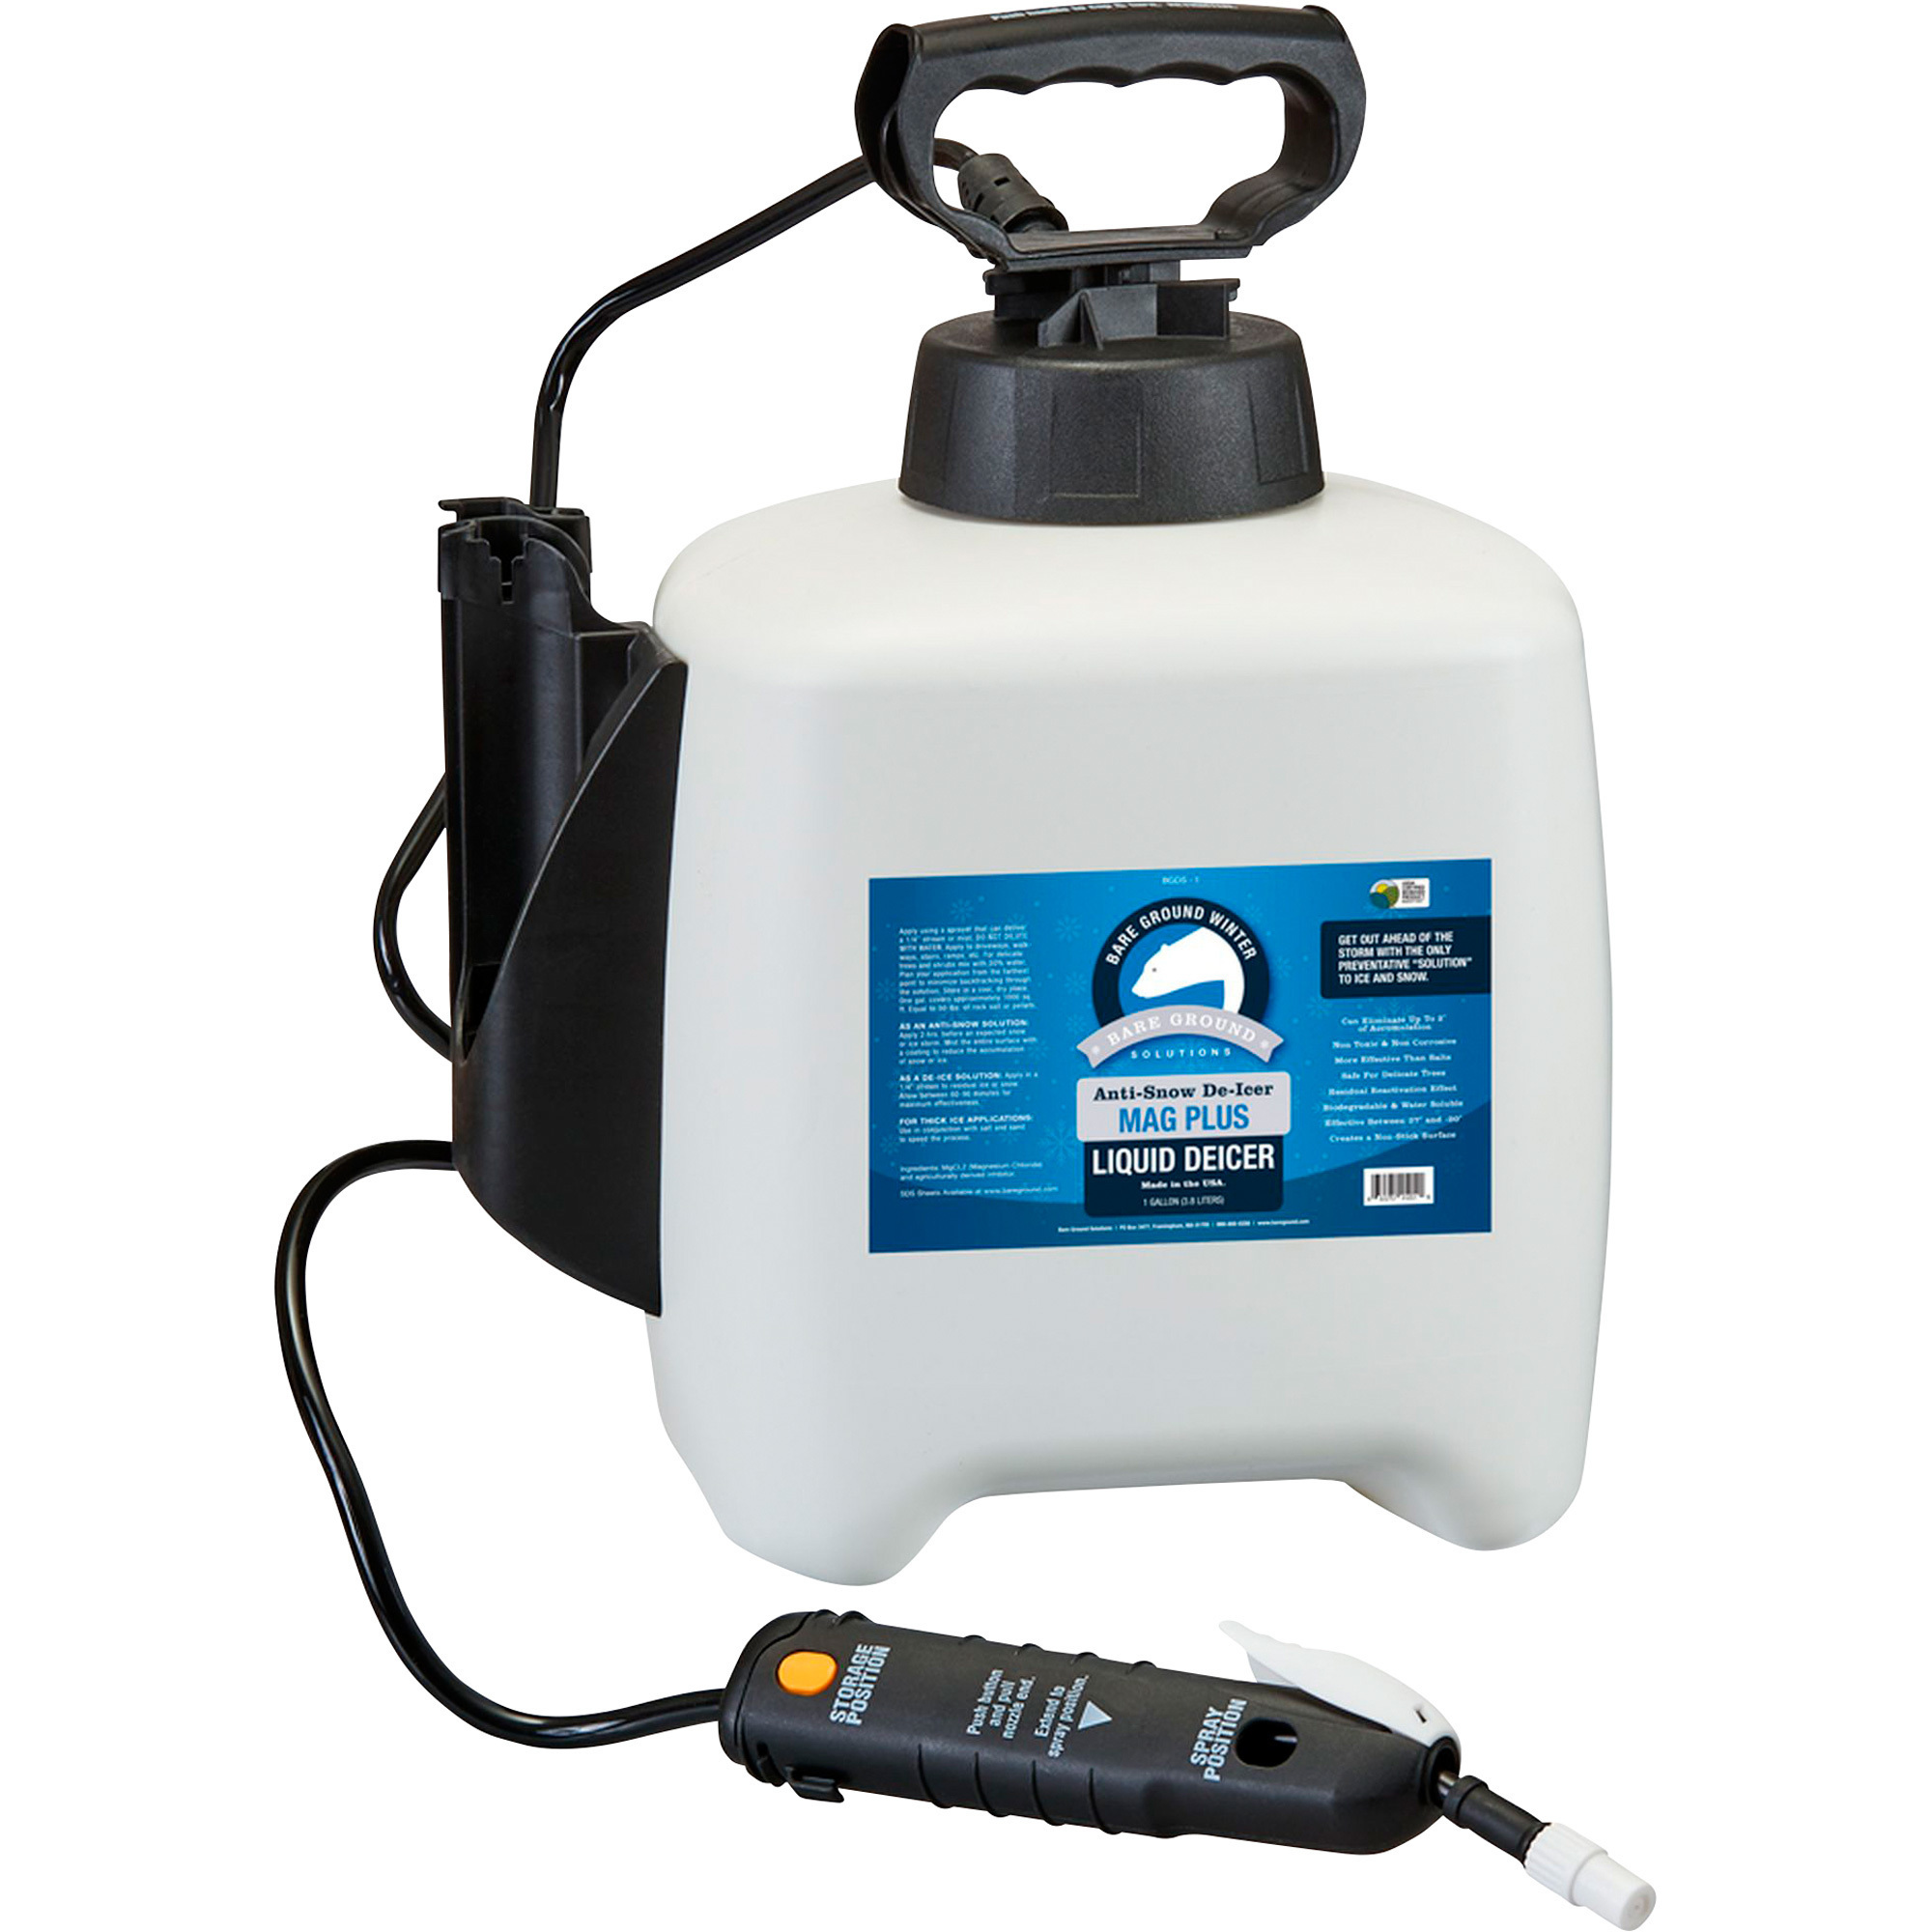 Bare Ground Deluxe System with Pump Sprayer and 1 Gal of Liquid Deicer